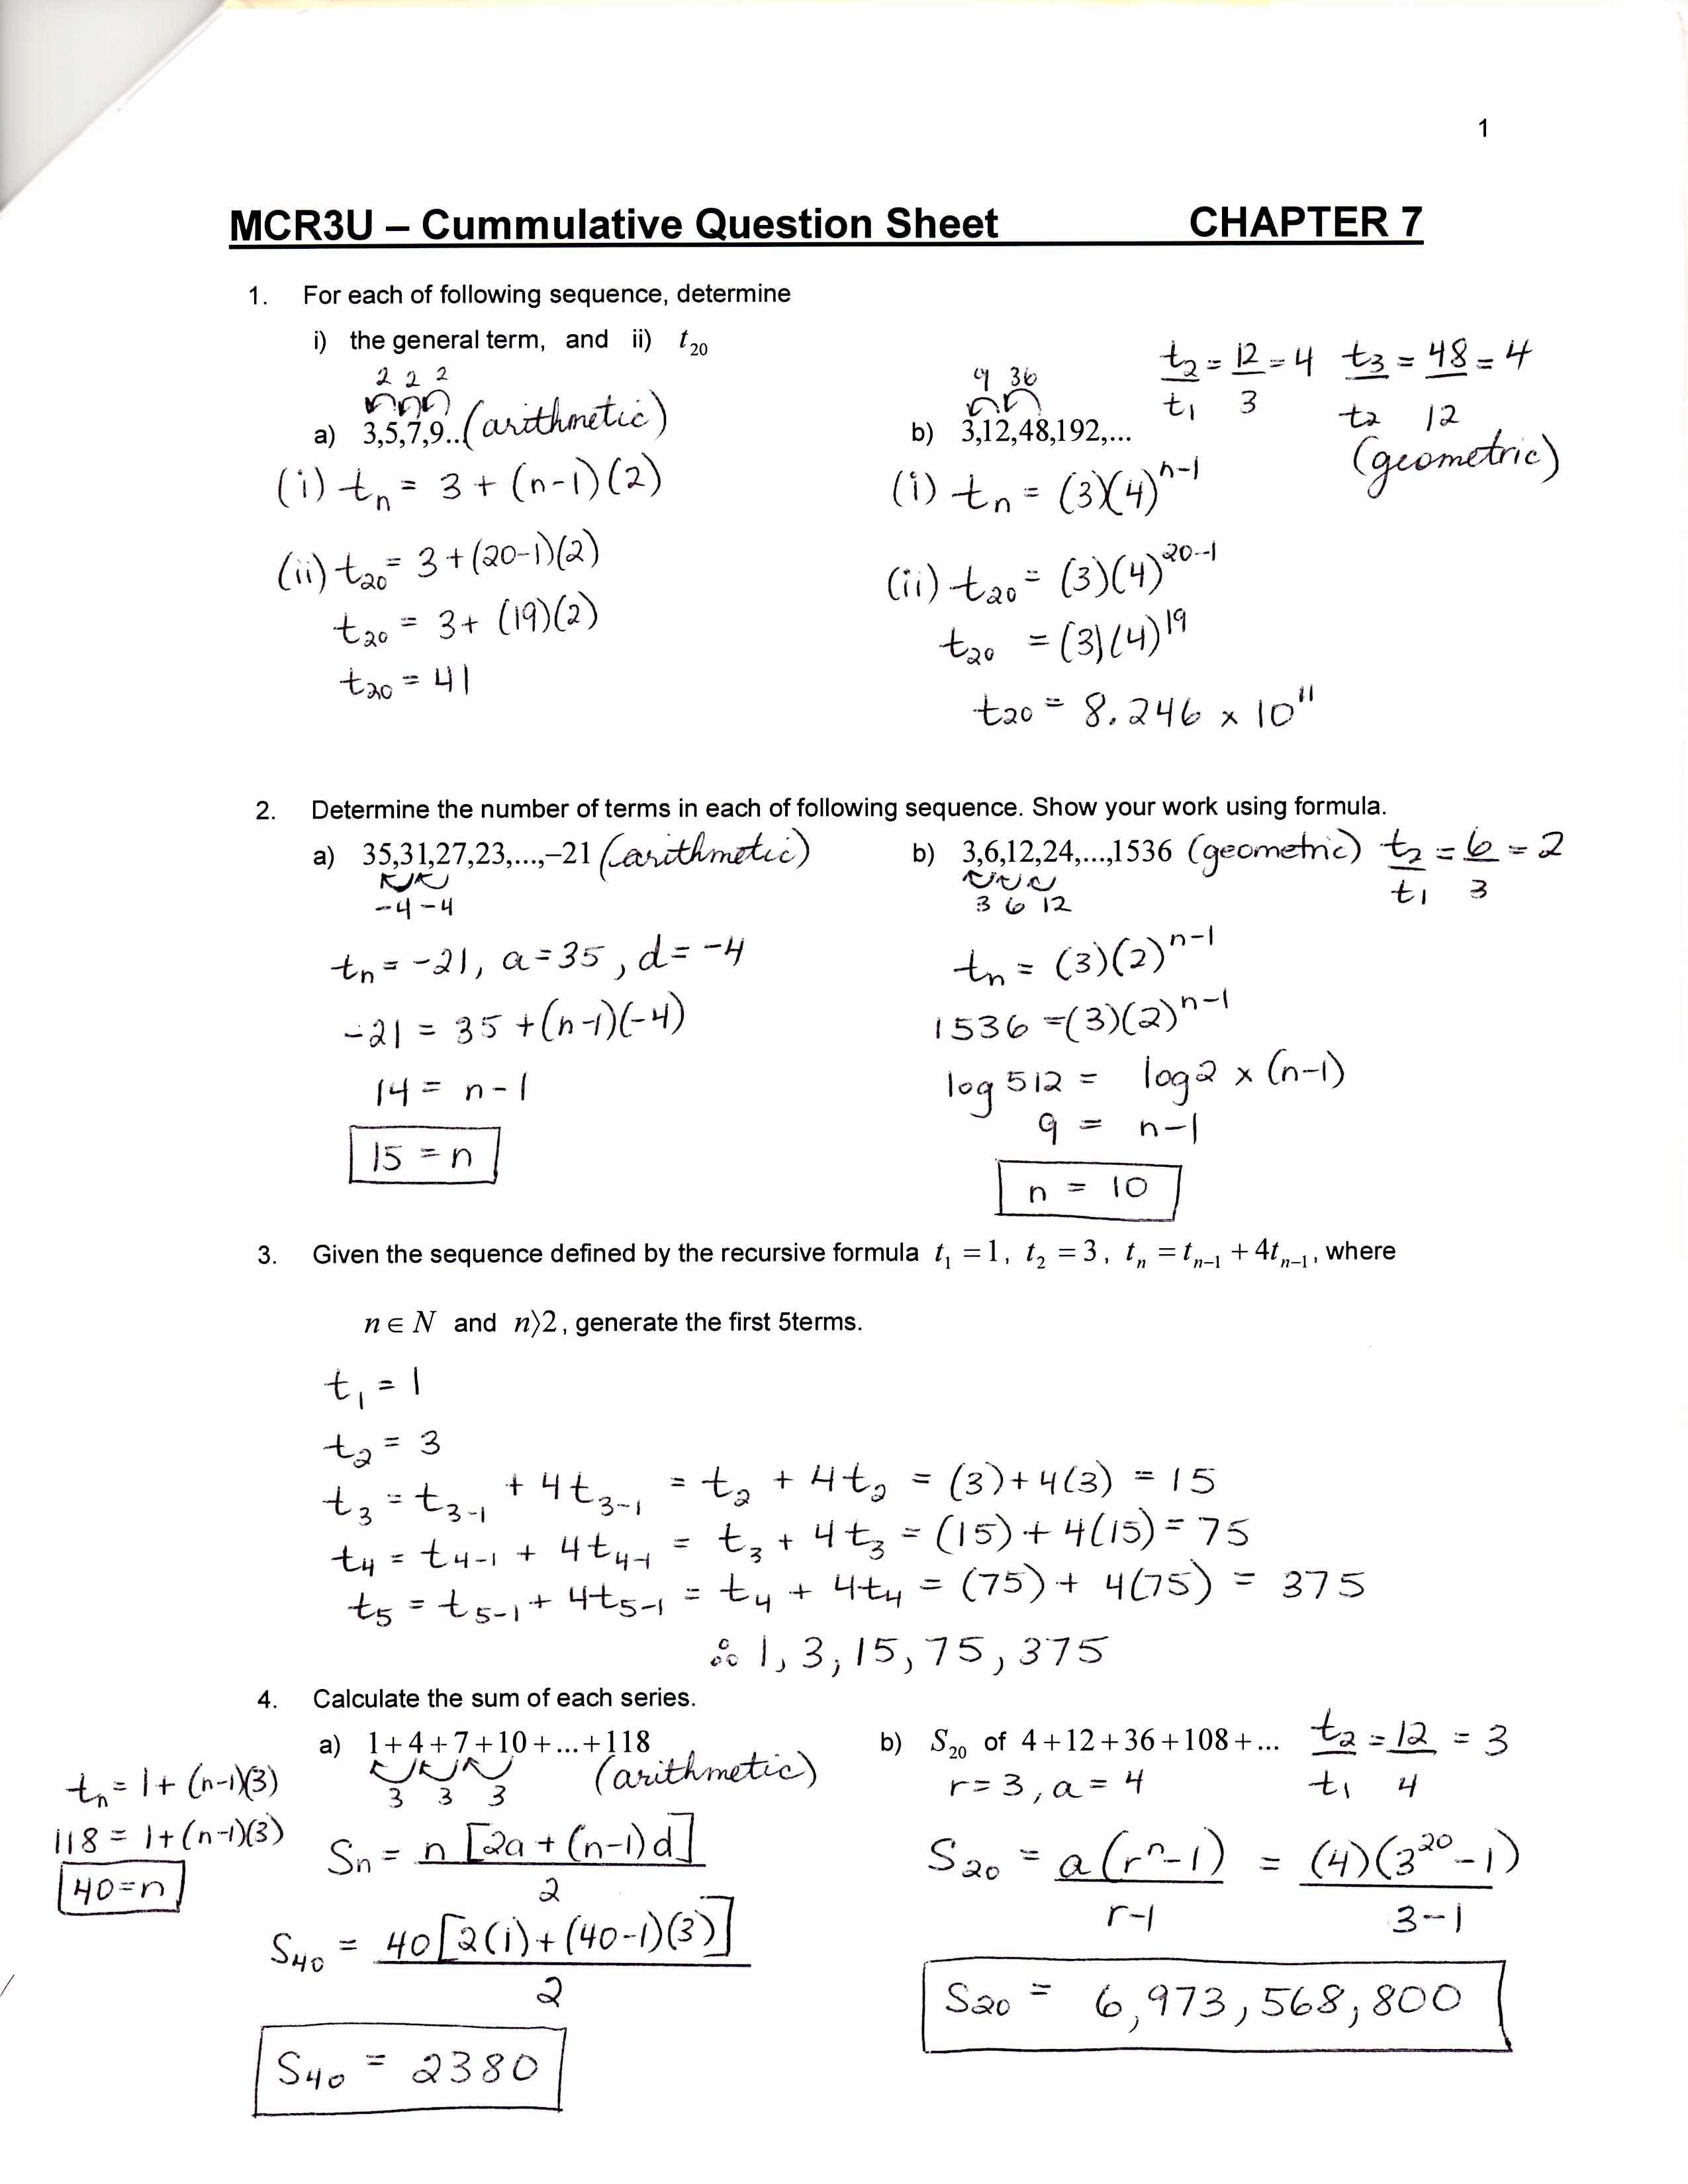 Angles Formedparallel Lines Worksheet Answers Milliken